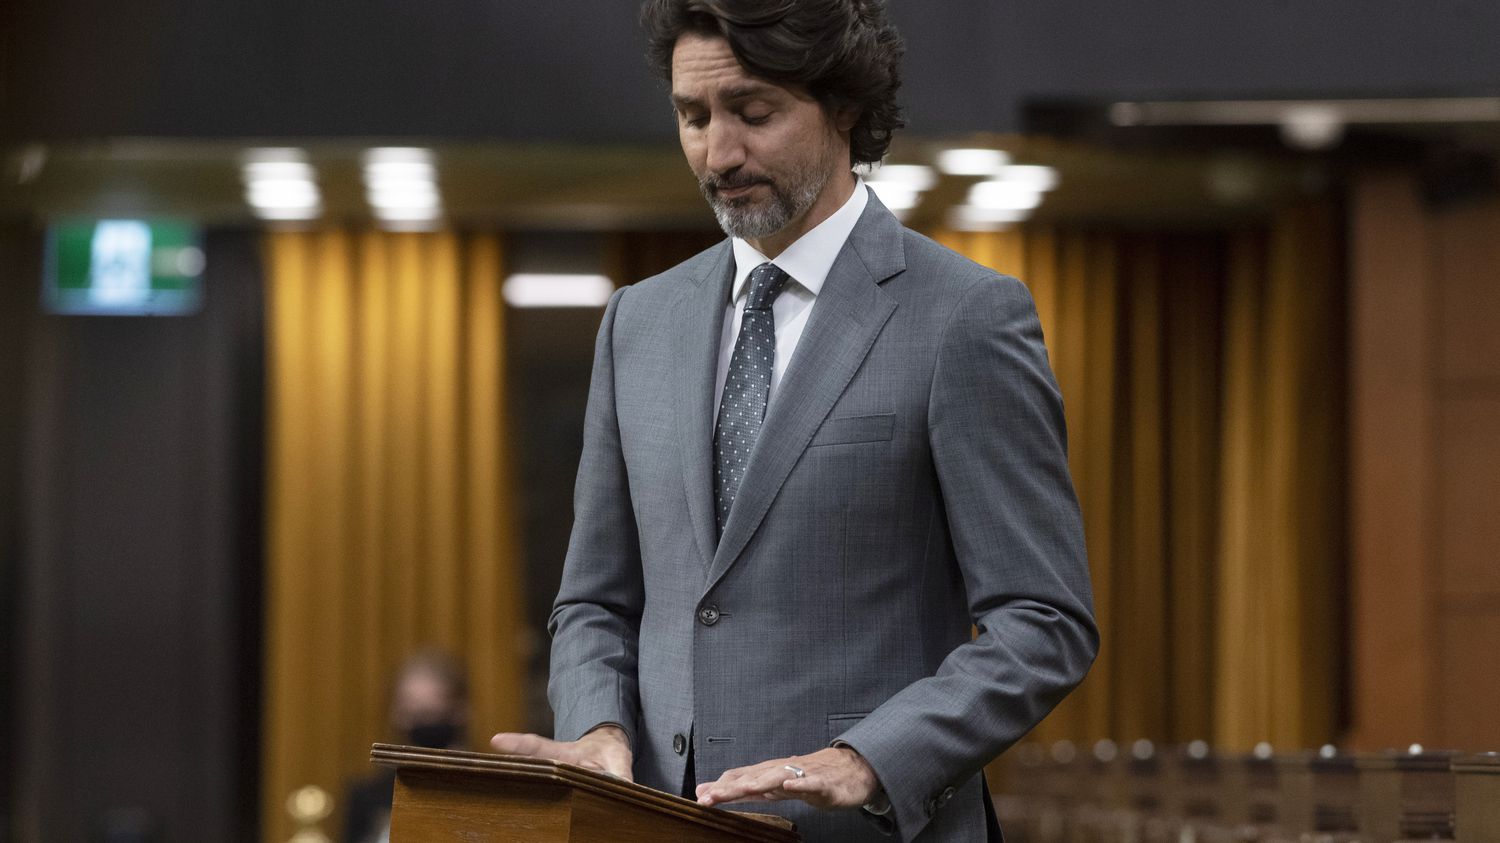 Justin Trudeau called on the Catholic Church to recognize its “responsibility” after the discovery of the remains of 215 Aboriginal children at a former boarding school